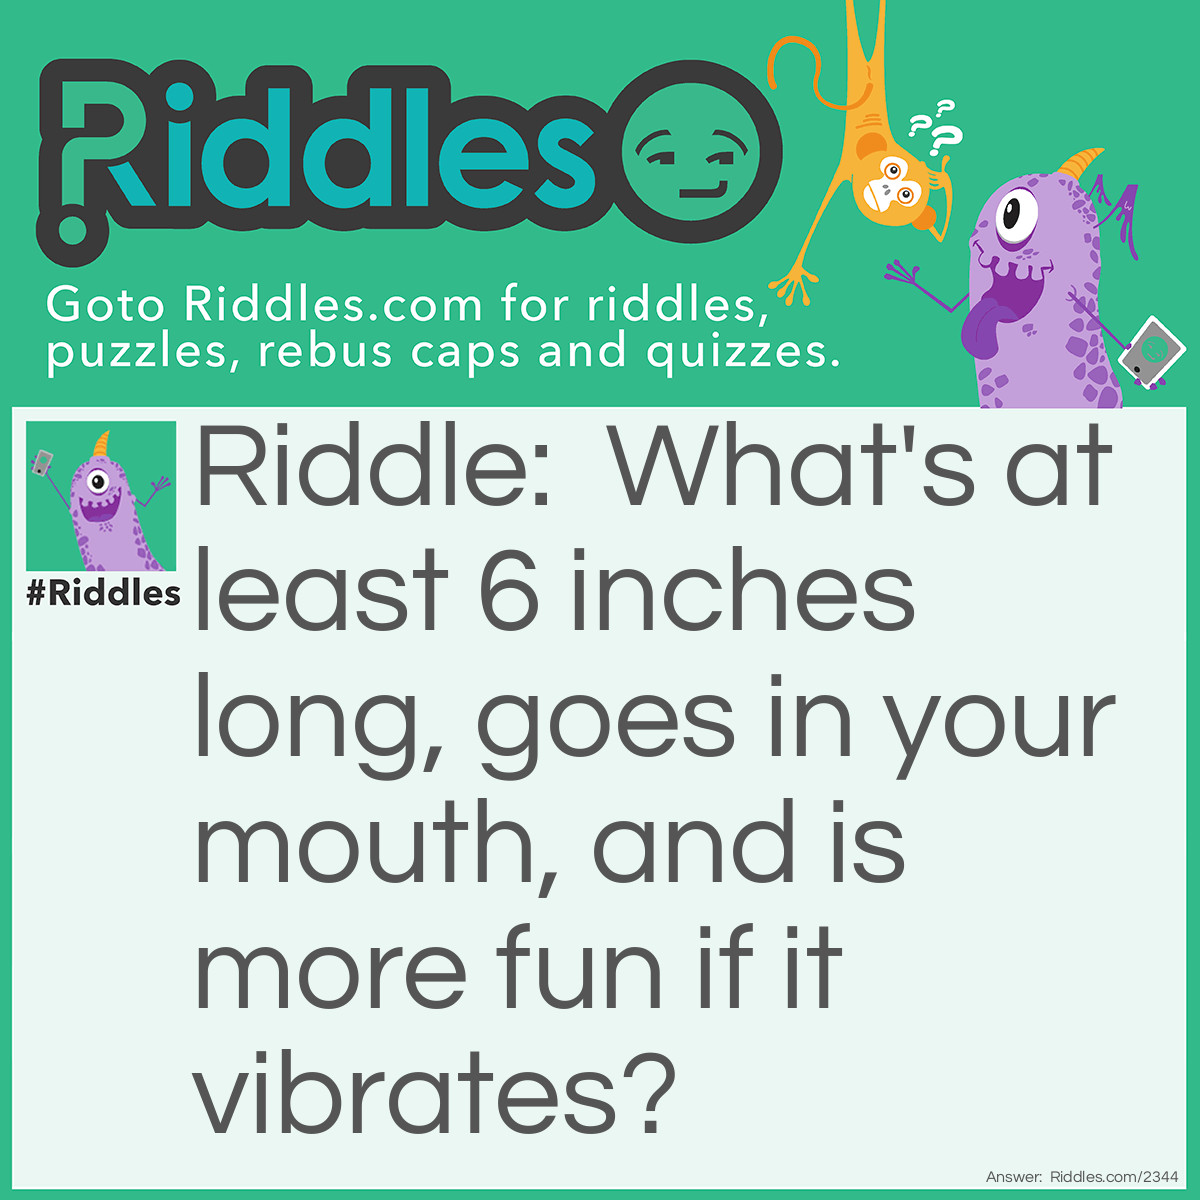 Riddle: What's at least 6 inches long, goes in your mouth, and is more fun if it vibrates? Answer: A toothbrush. Come on.